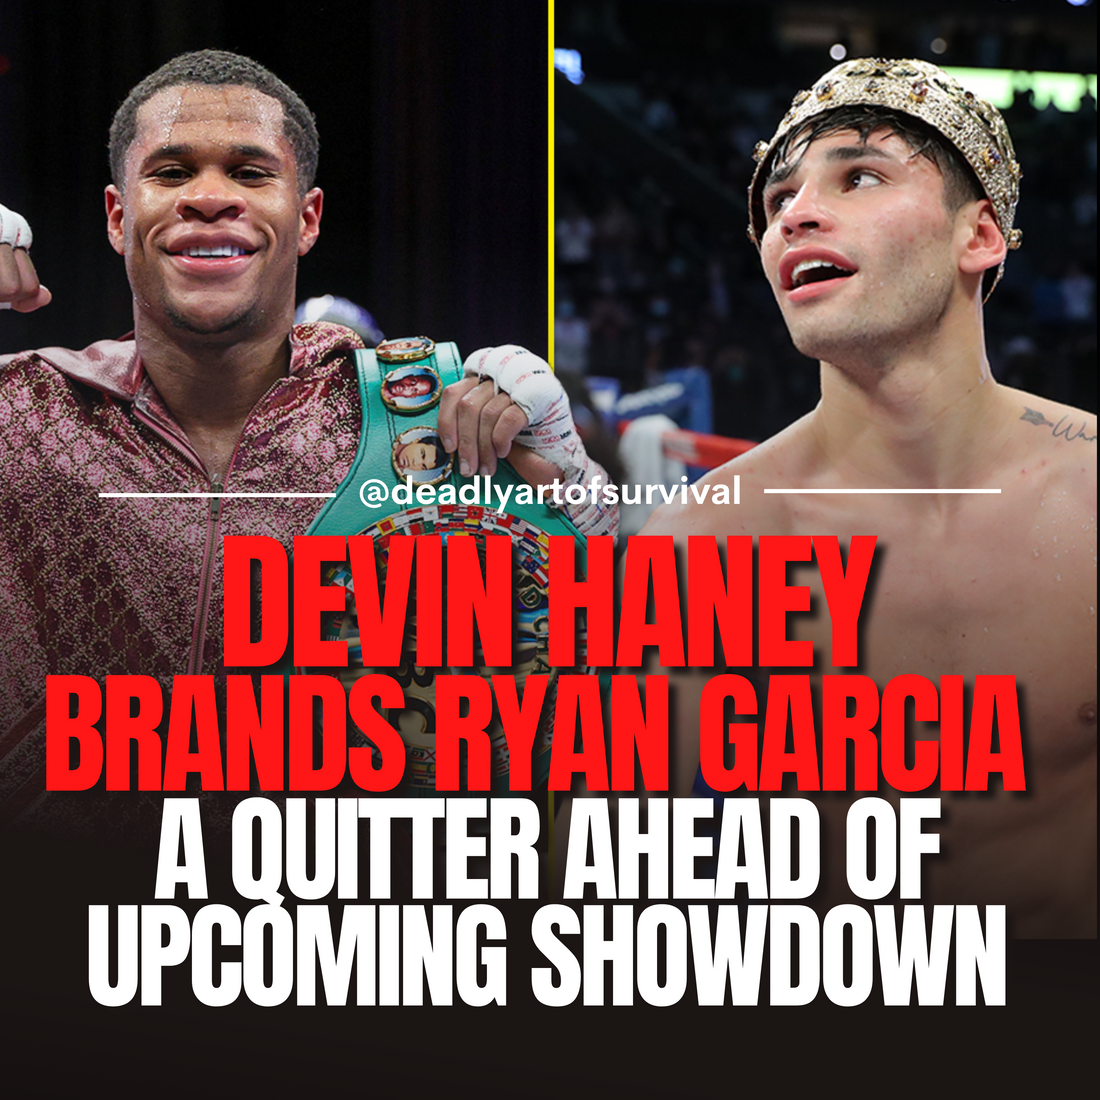 Haney-Throws-Verbal-Jabs-at-Garcia-and-calls-him-a-quitter-in-Pre-Fight-Faceoff deadlyartofsurvival.com